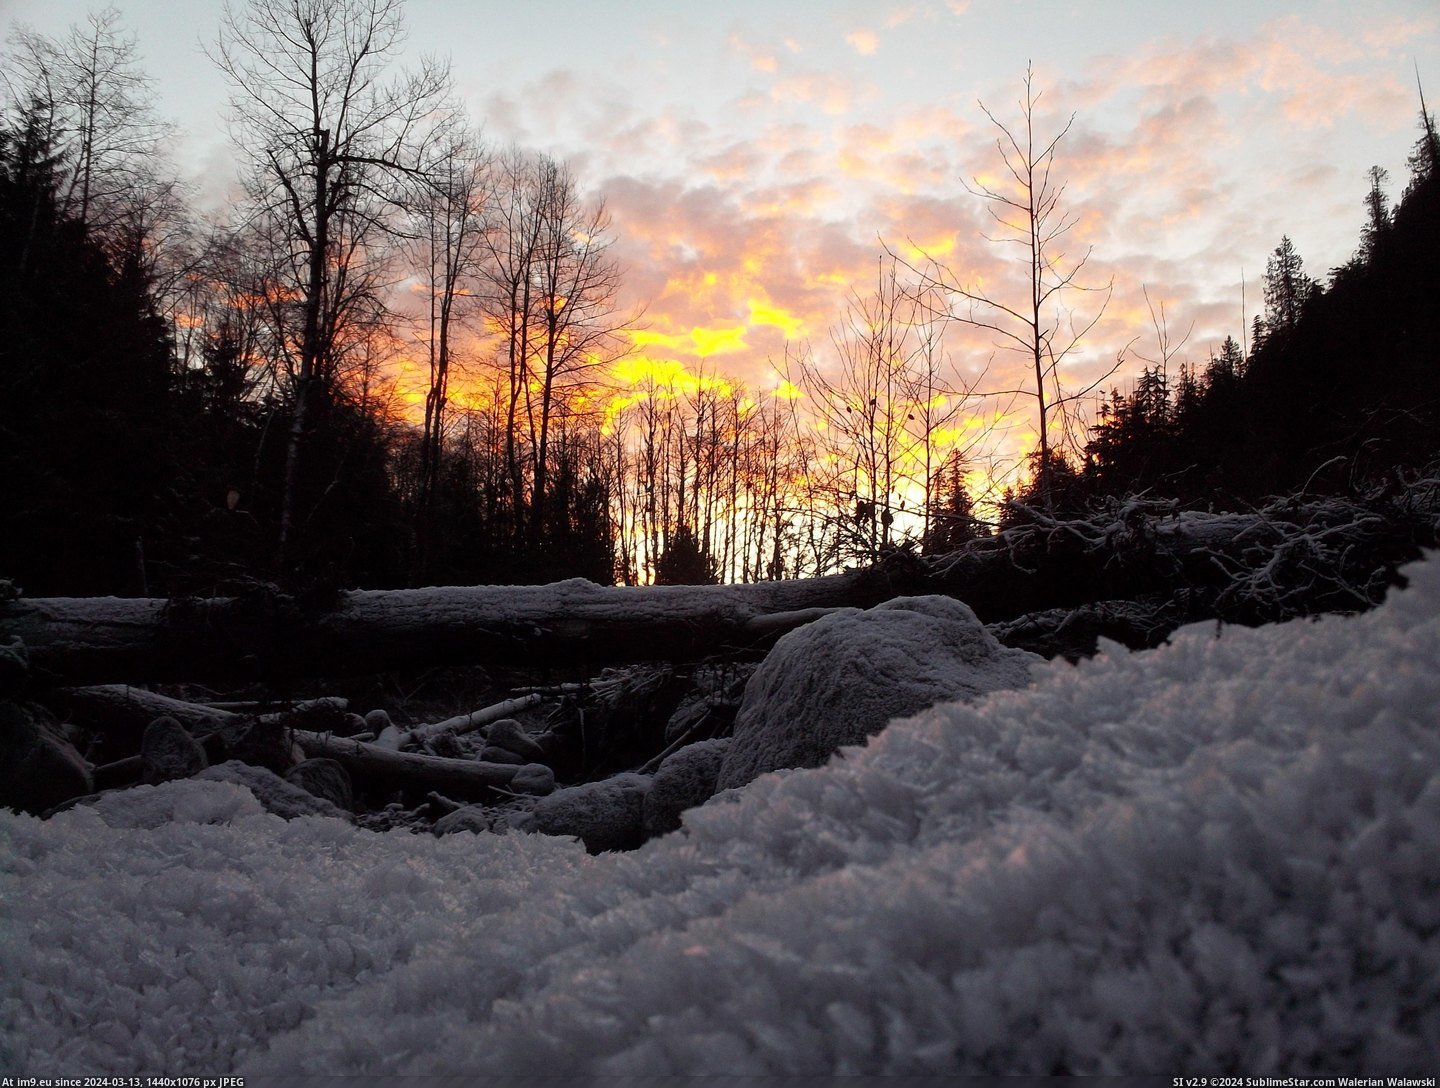 #State #River #Ice #Fork #Nooksack #Fire #Sunrise #4000x3000 [Earthporn] Fire and Ice. Sunrise near the Middle Fork of the Nooksack River-WA state. [OC](4000x3000) Pic. (Изображение из альбом My r/EARTHPORN favs))